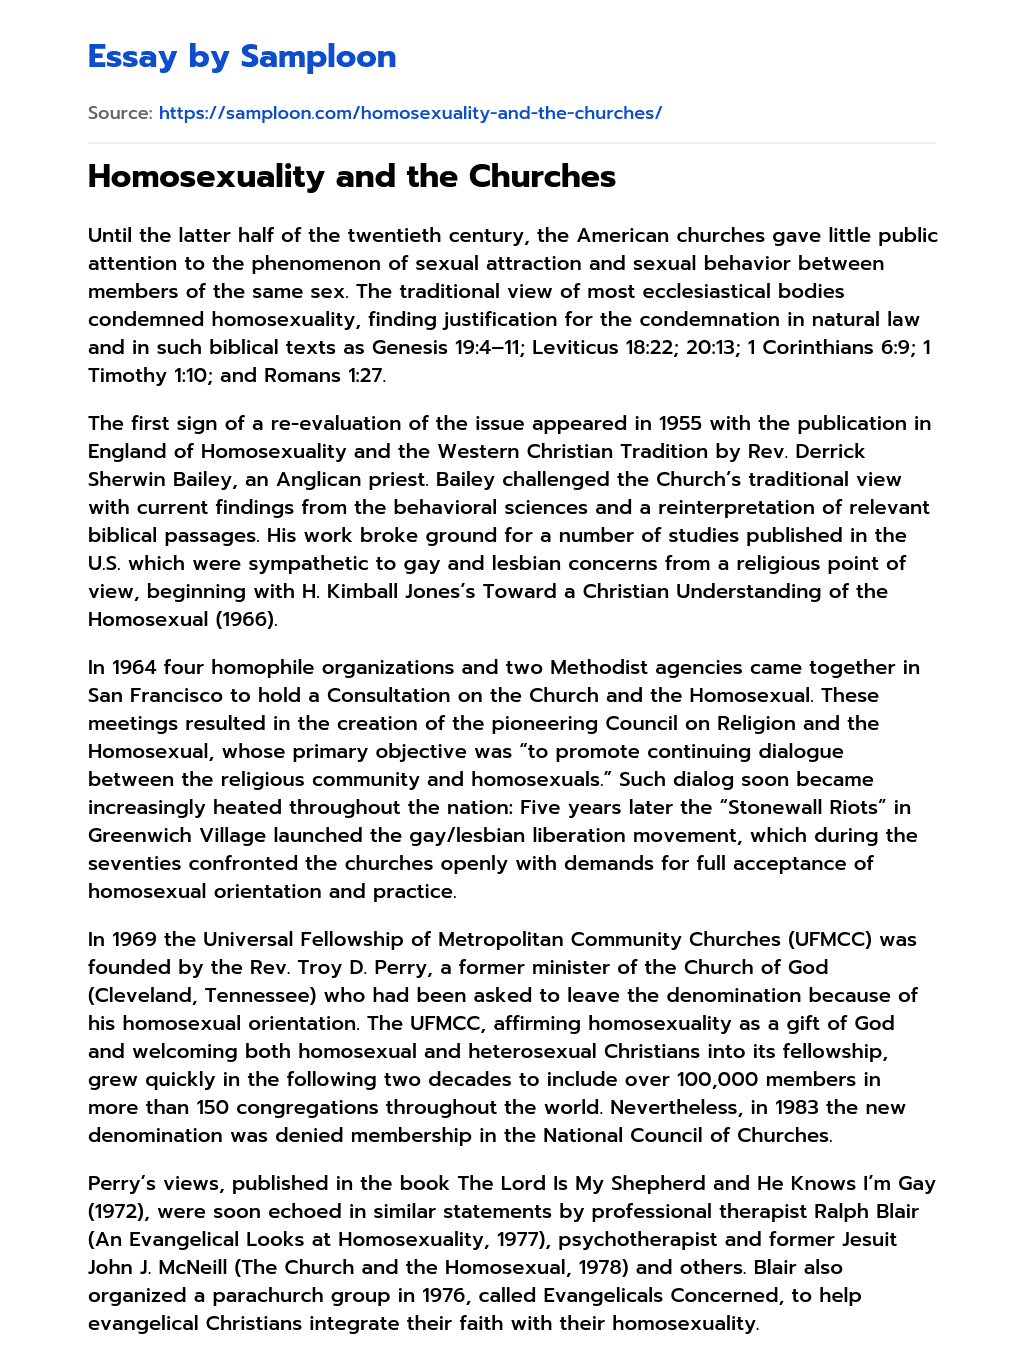 Homosexuality and the Churches essay